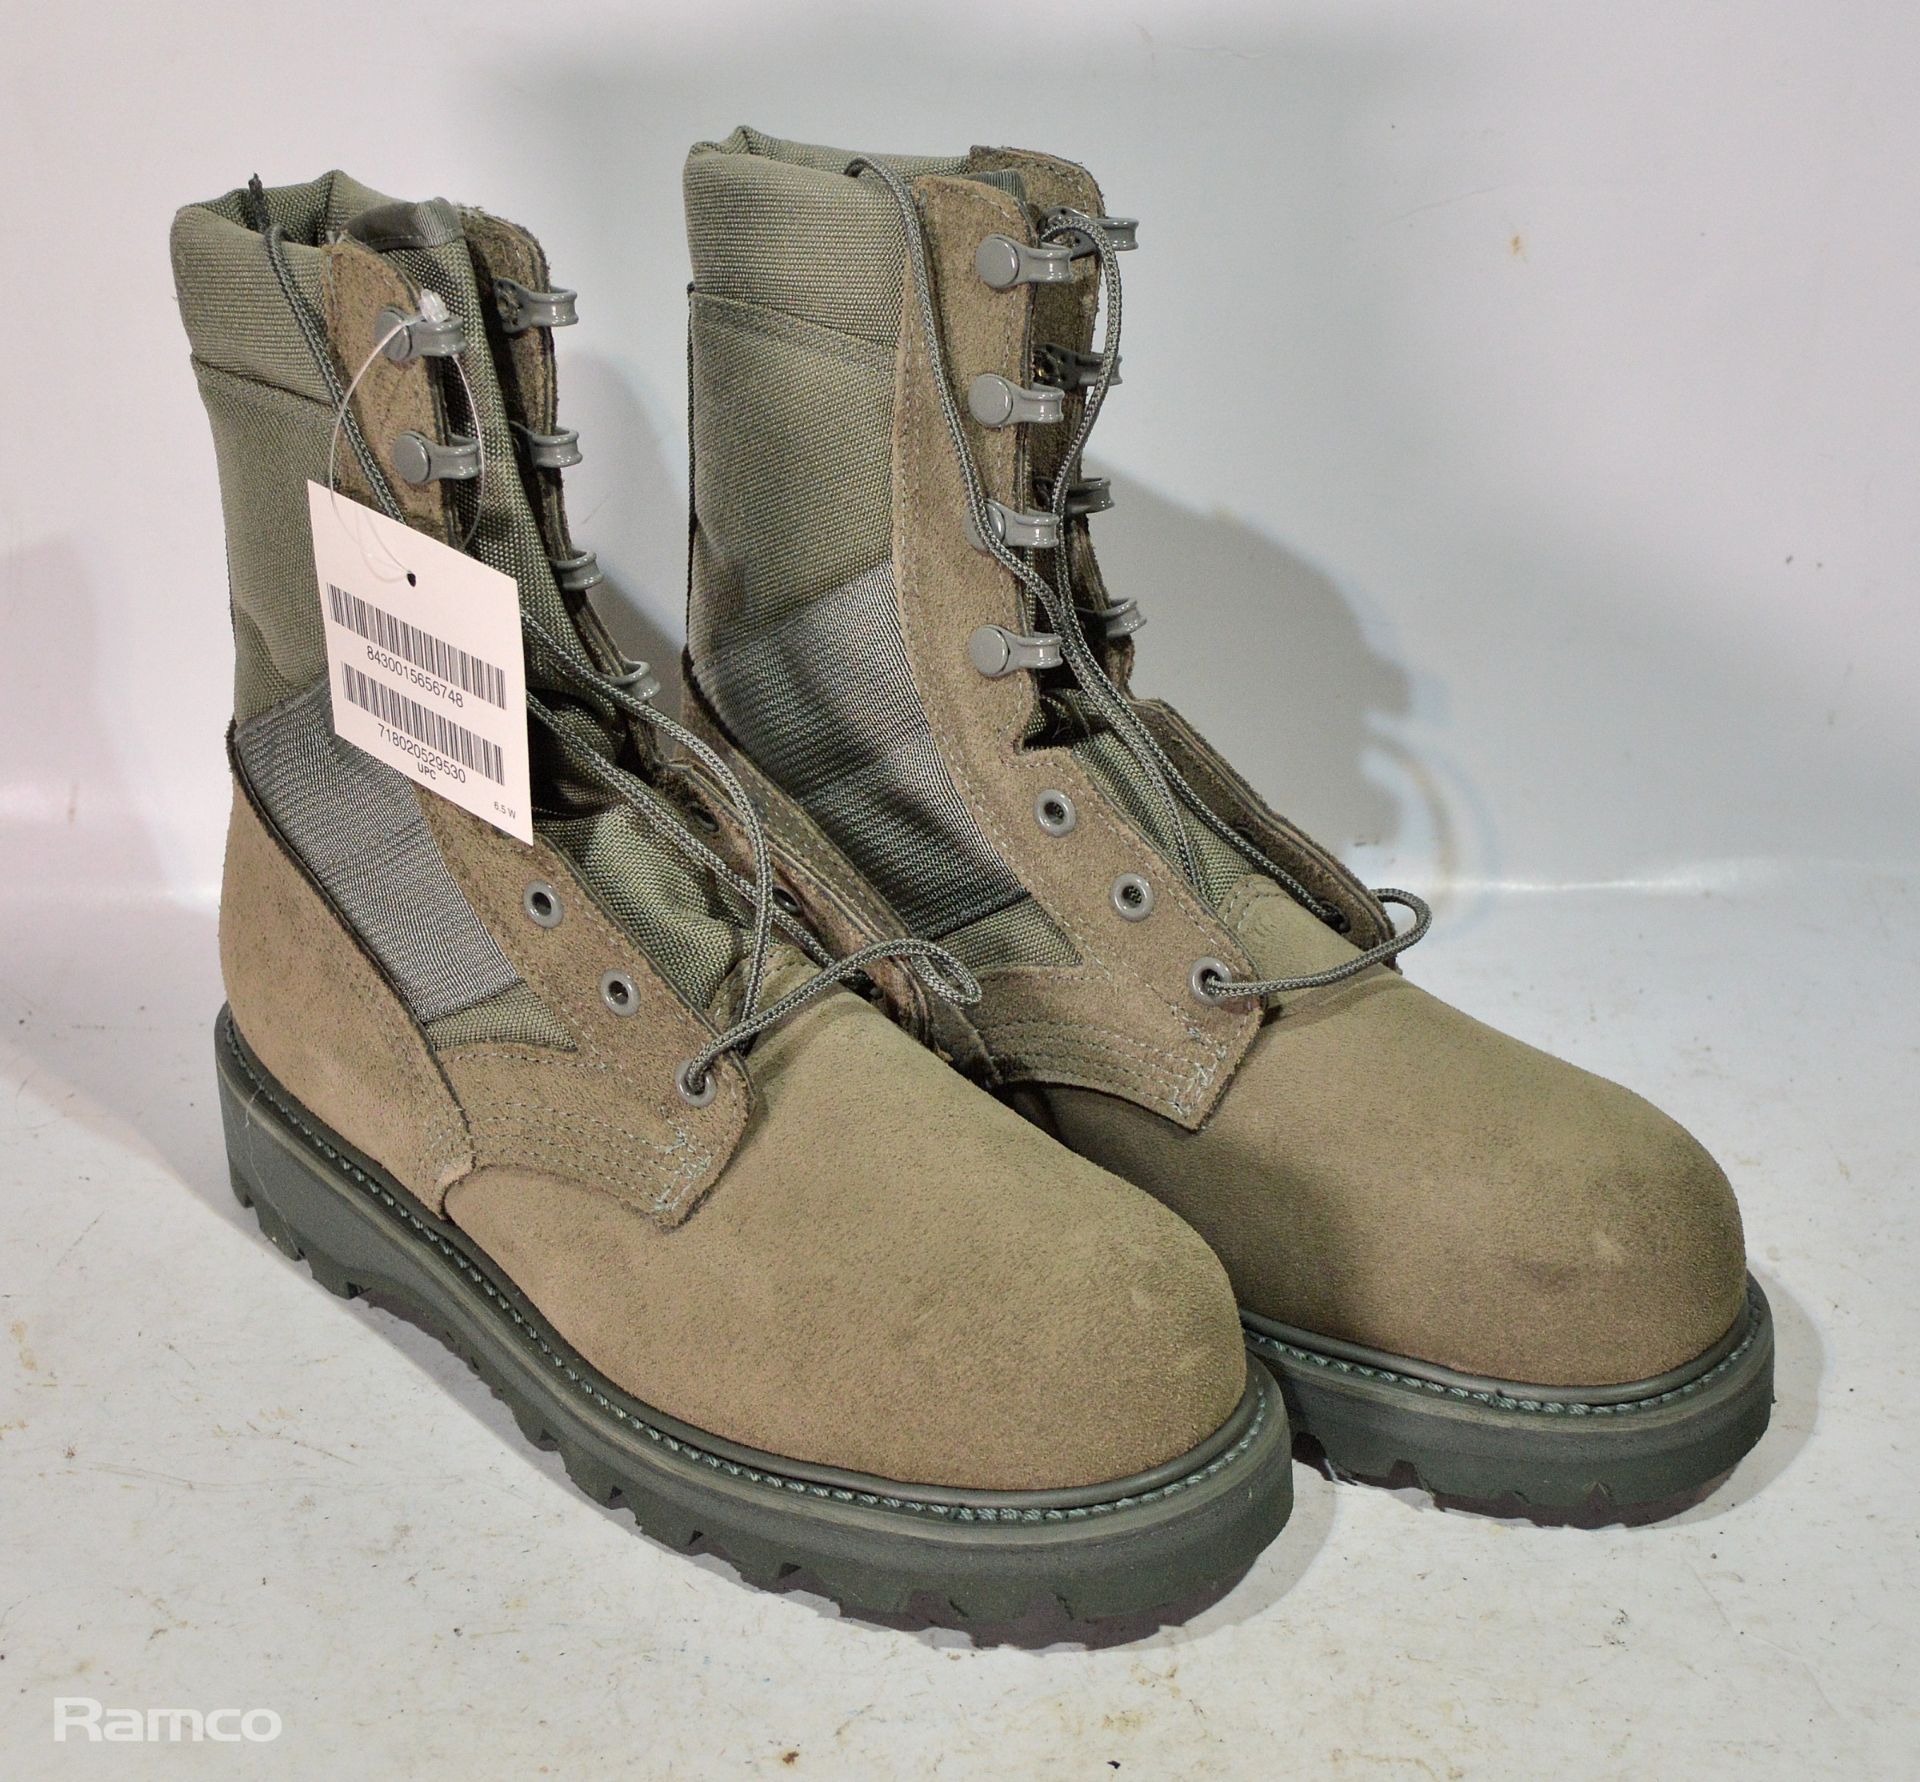 Thorogood Hot Weather Boots - 6 1/2 W